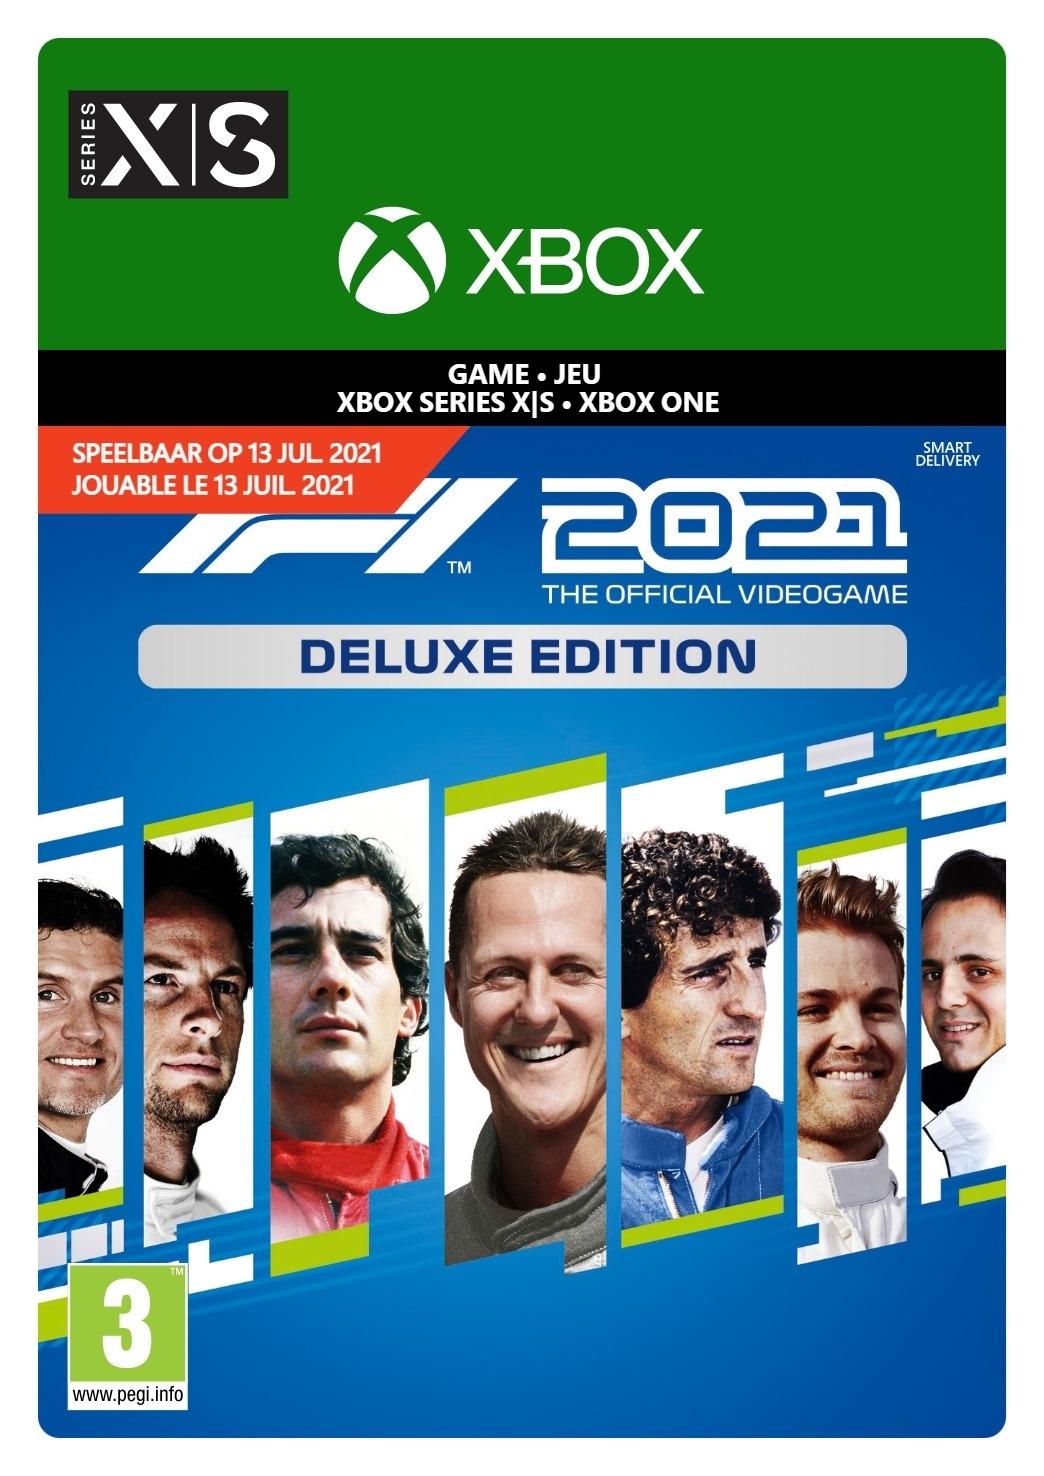 F1 2021: Deluxe Edition (Pre-Purchase/Launch Day) - Xbox Series X/Xbox One - Game | G3Q-01161 (a0d0e758-207d-524a-ade4-62d9e74f23fb)